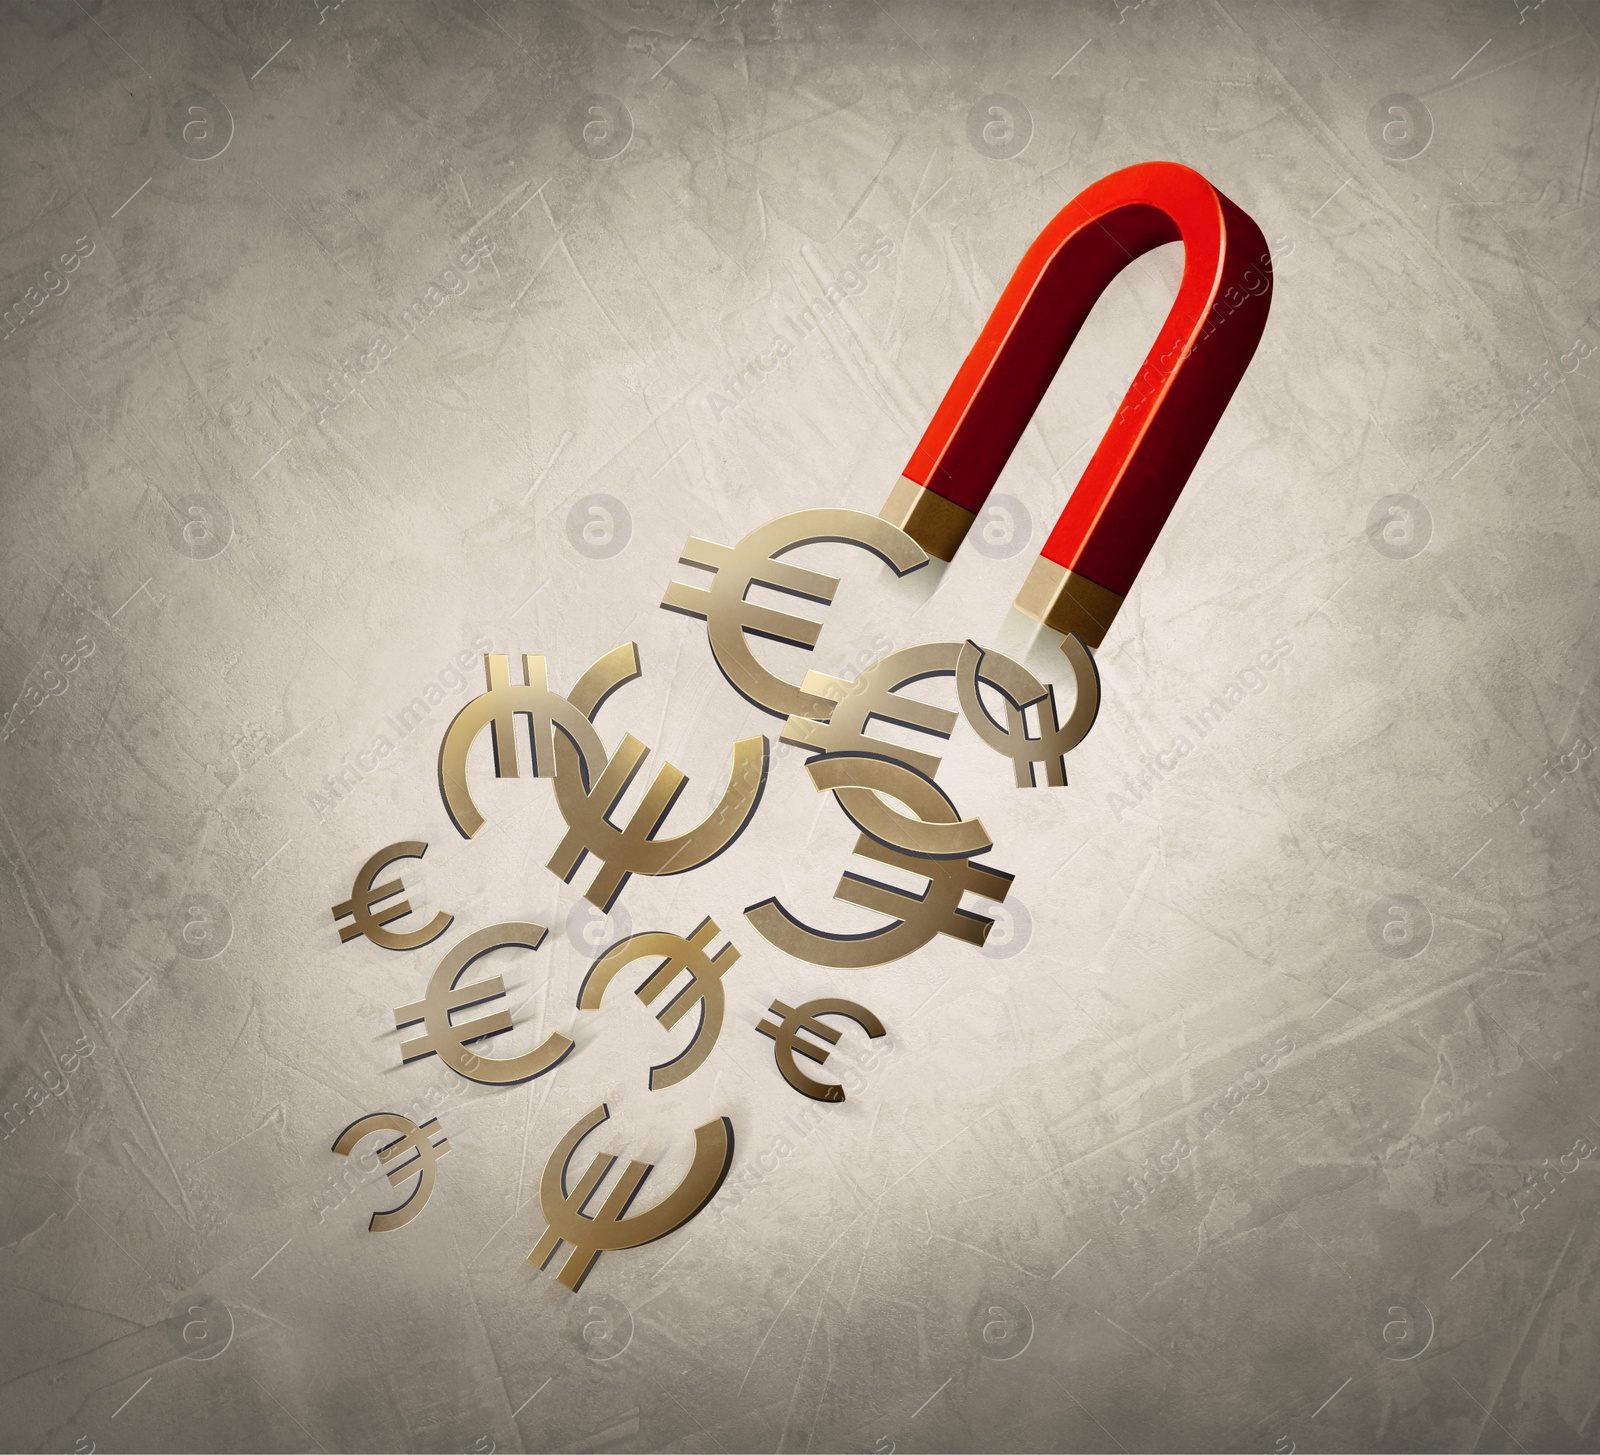 Image of Red horseshoe magnet attracting golden euro signs on grey background